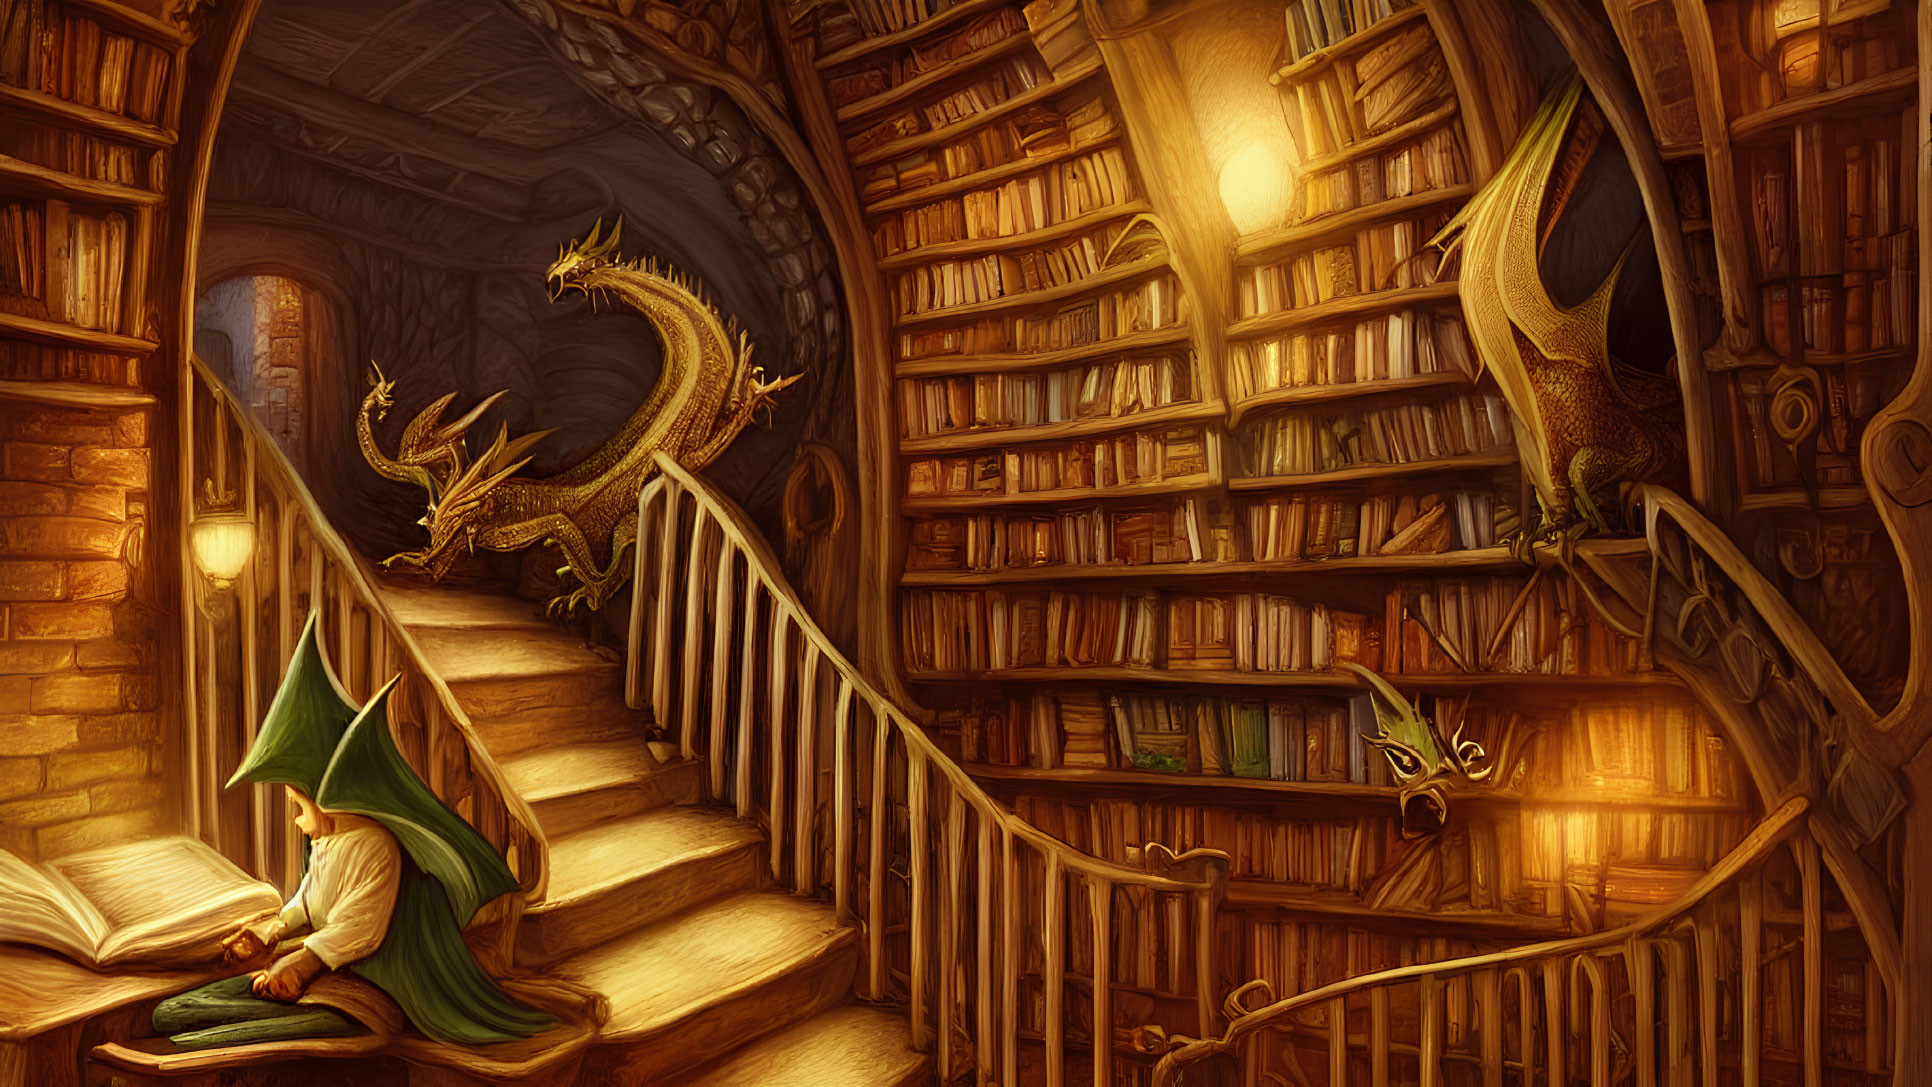 Whimsical library with arched ceilings and dragon figures reading and climbing.